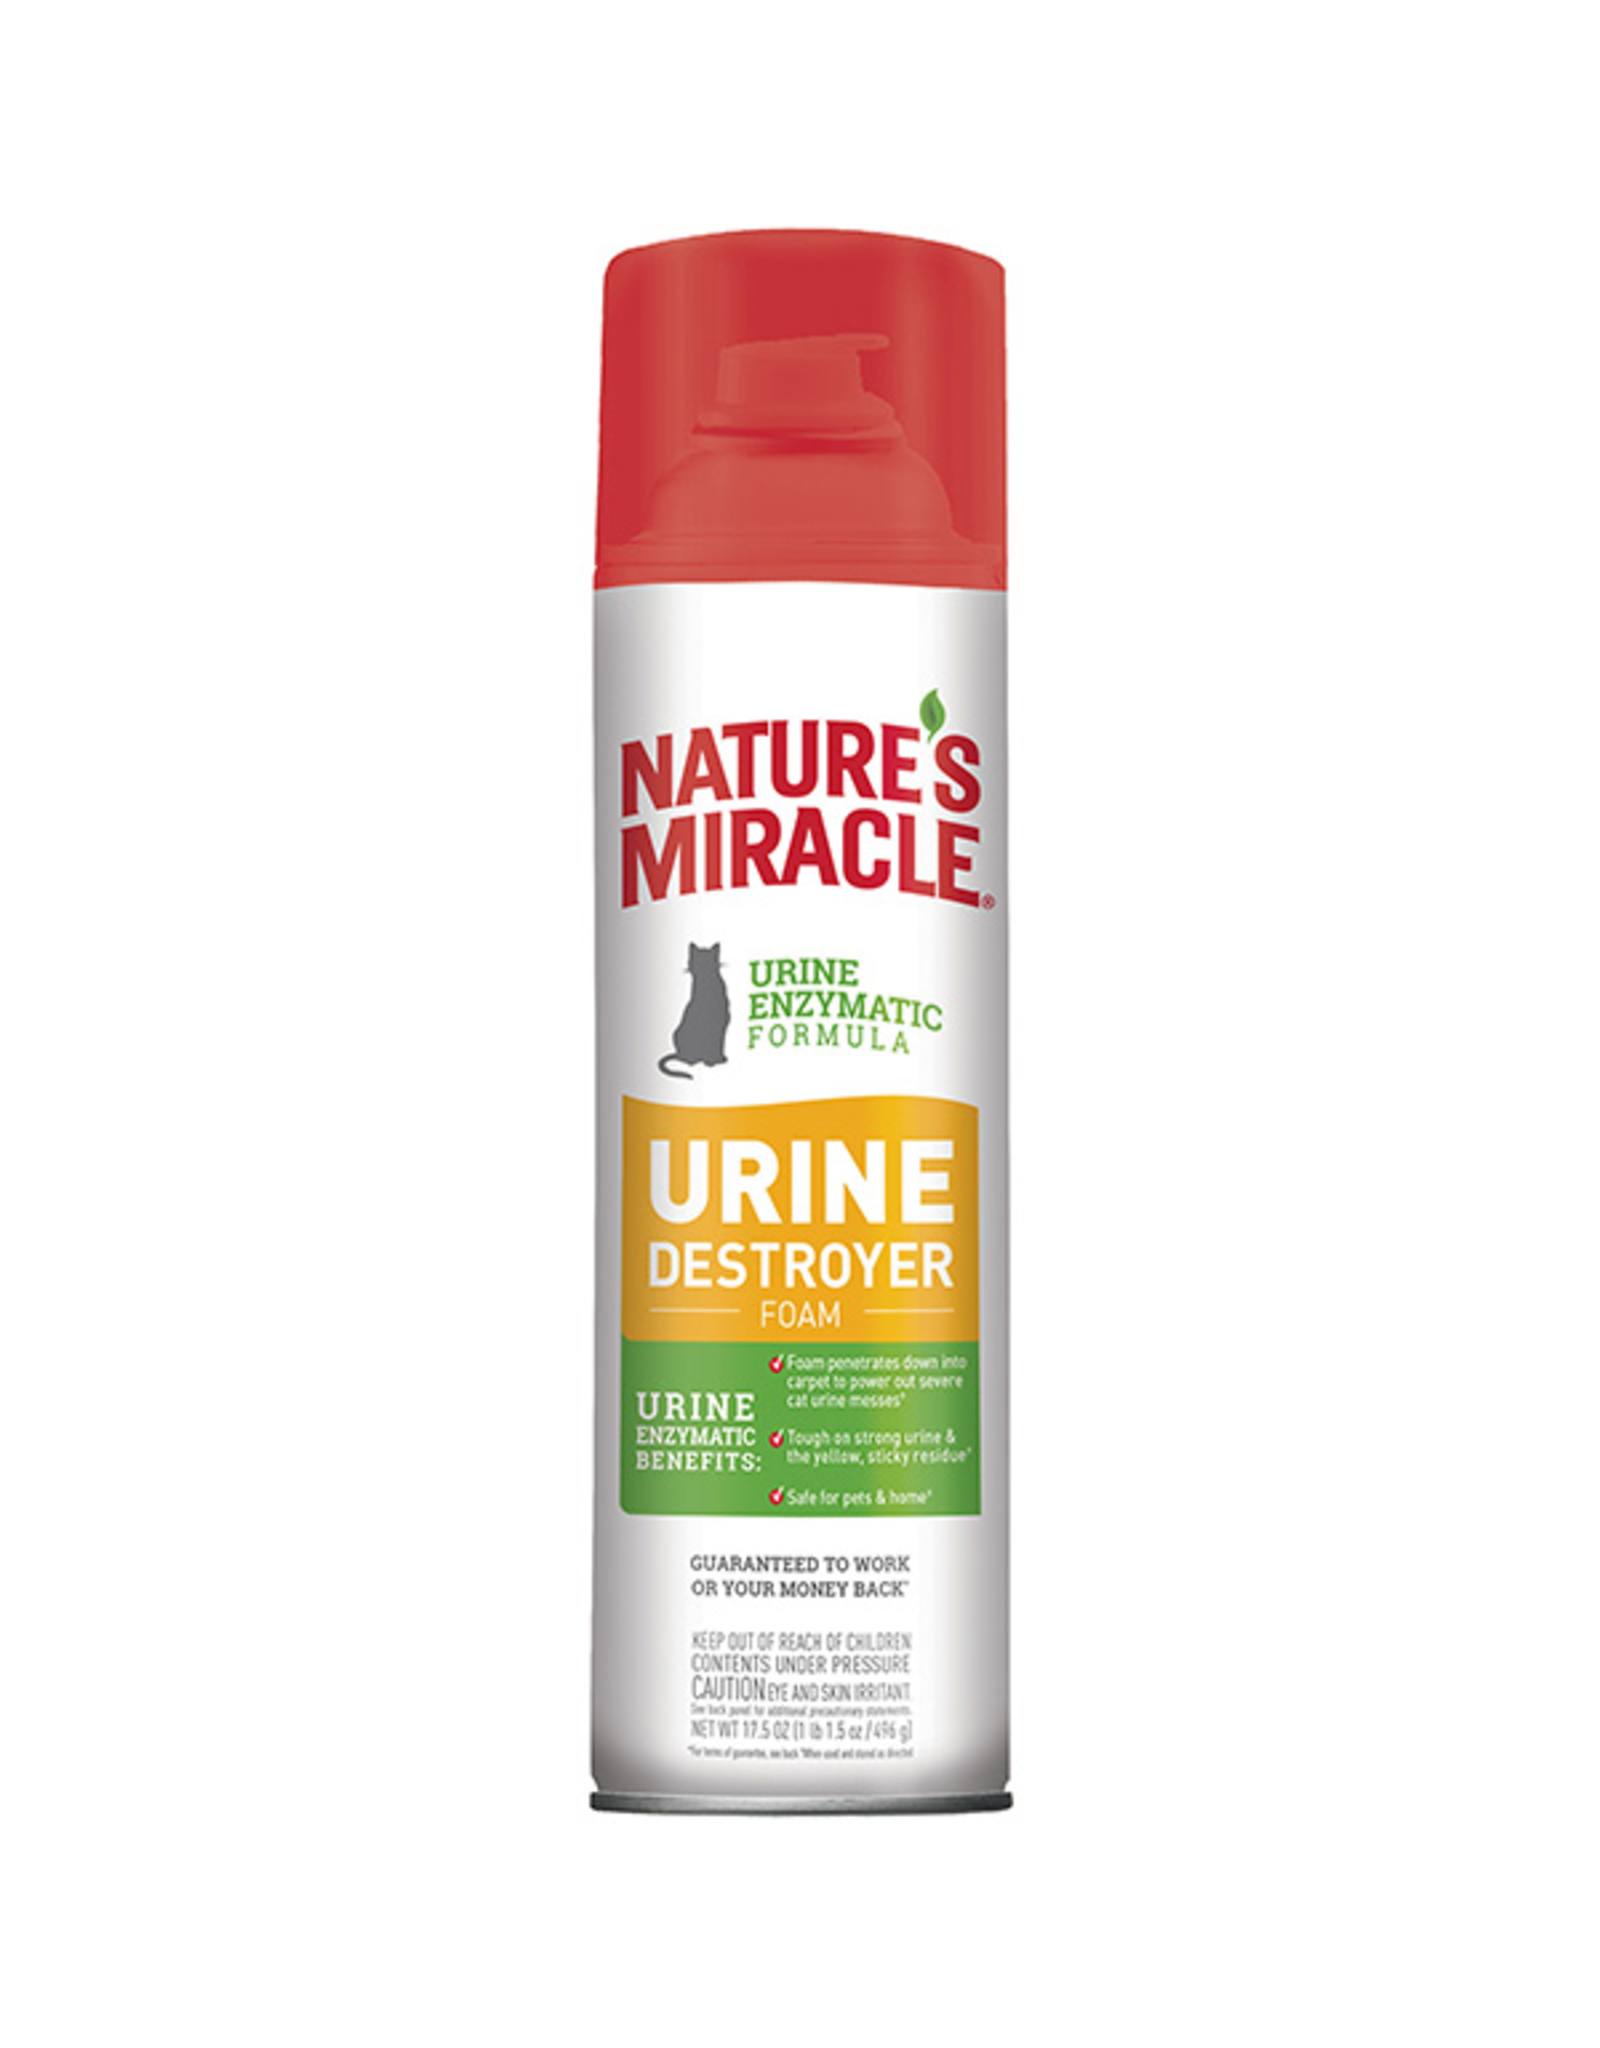 Nature's Miracle Nature's Miracle Urine Destroyer Foam Aerosol [CAT] 17.5OZ~*